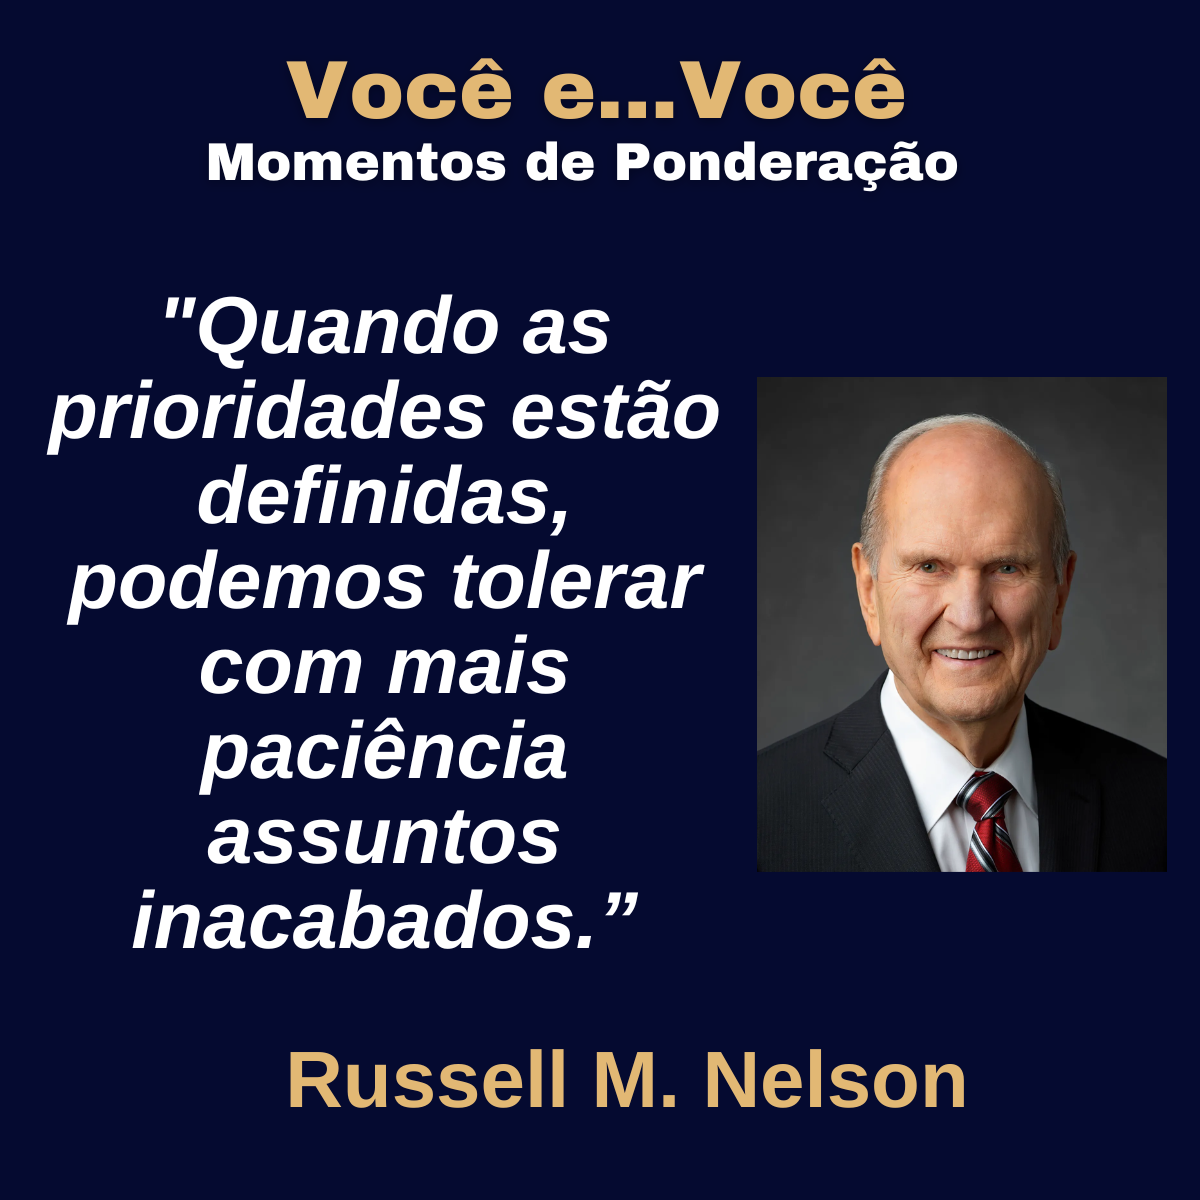 russell-m-nelson-7